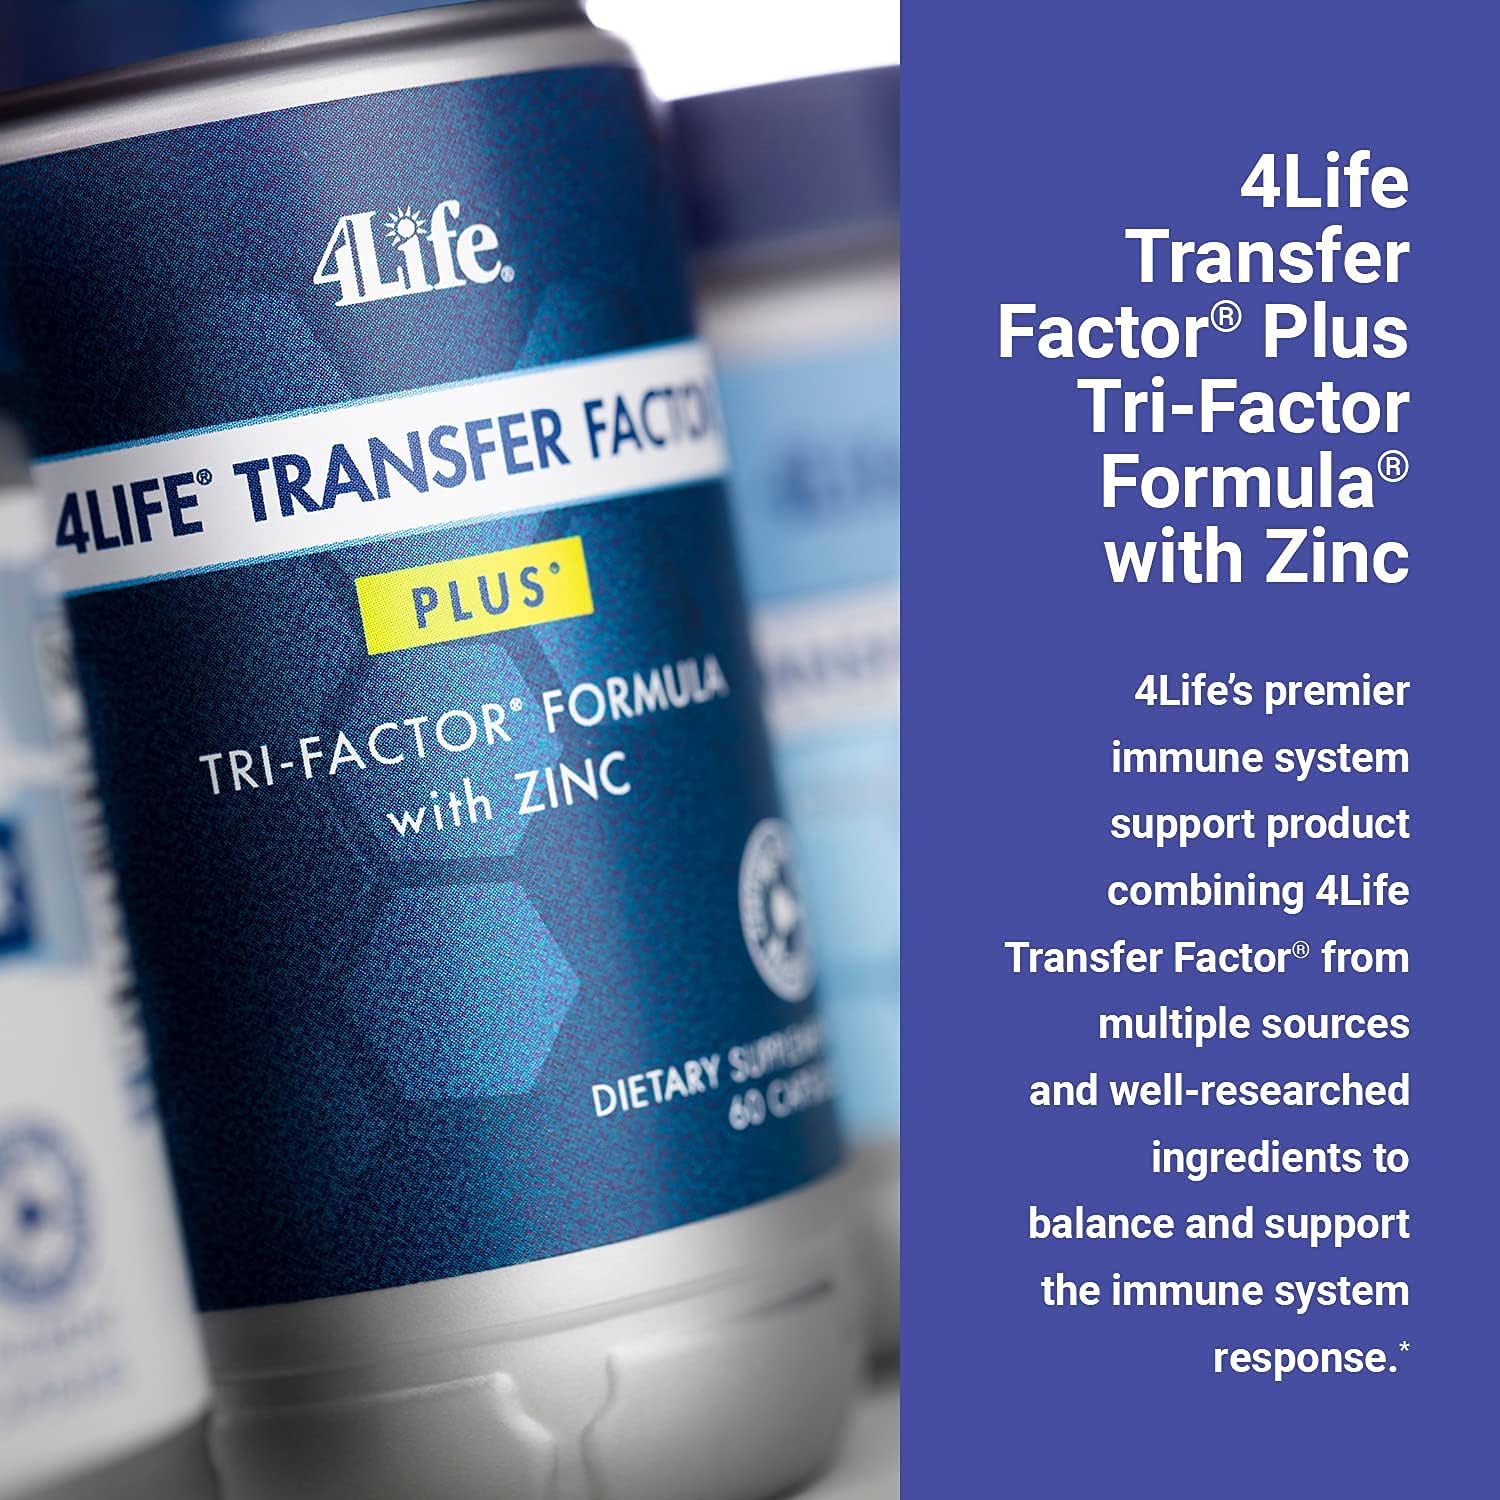 4LIFE TRANSFER FACTOR PLUS Tri-Factor Formula - Immune System Support with Zinc, Super Mushroom Blend (Maitake, Shiitake, Agaricus), and Extracts of Cow Colostrum and Chicken Egg Yolk - 60 Capsules : Health & Household